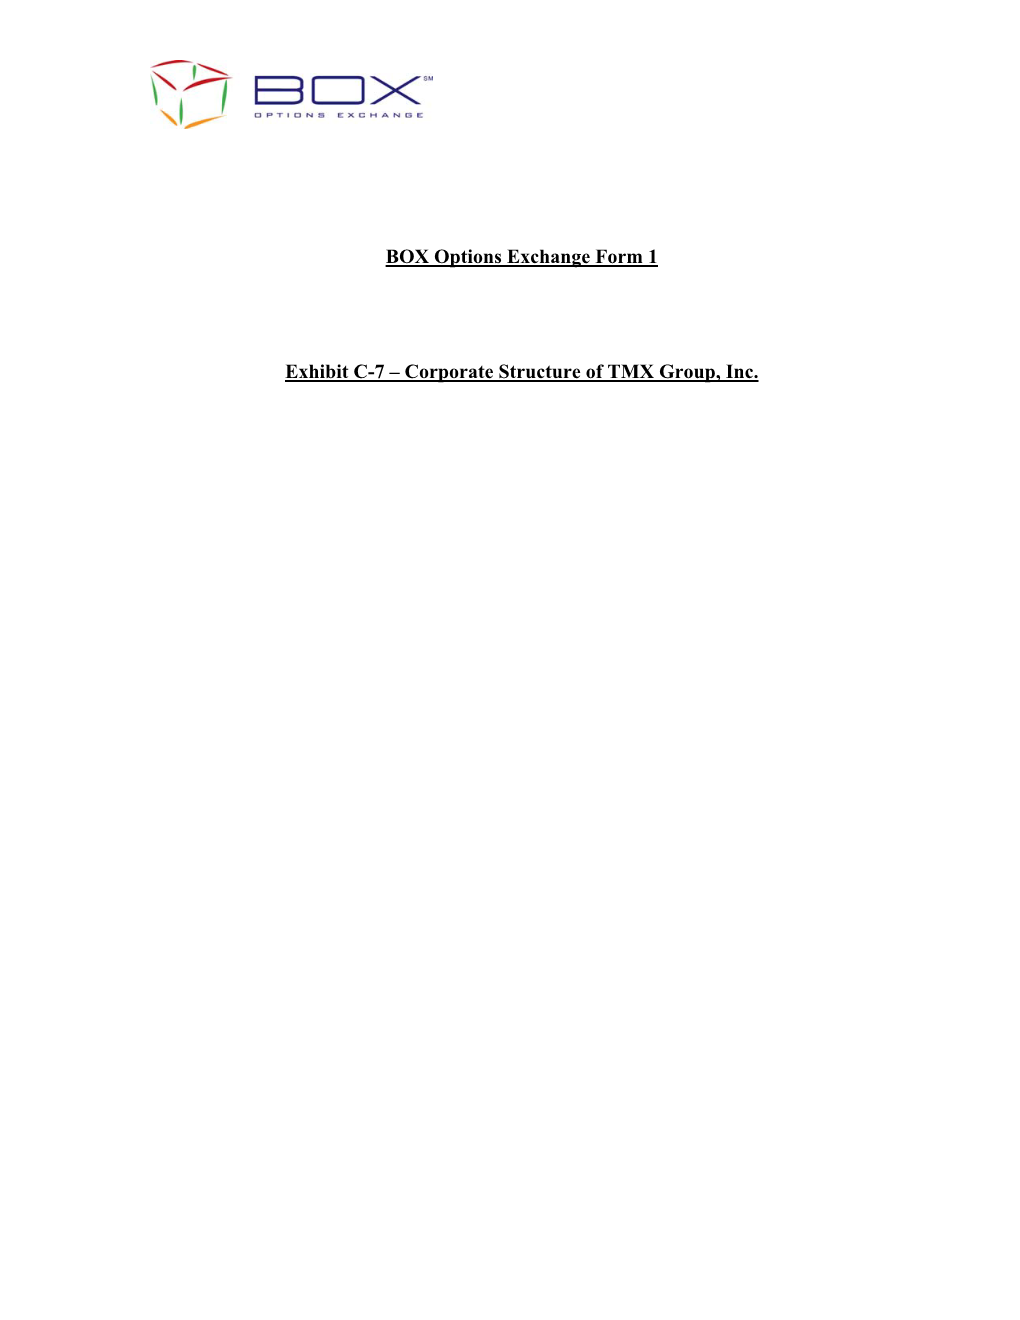 BOX Options Exchange LLC Form 1: Corporate Structure of TMX Group